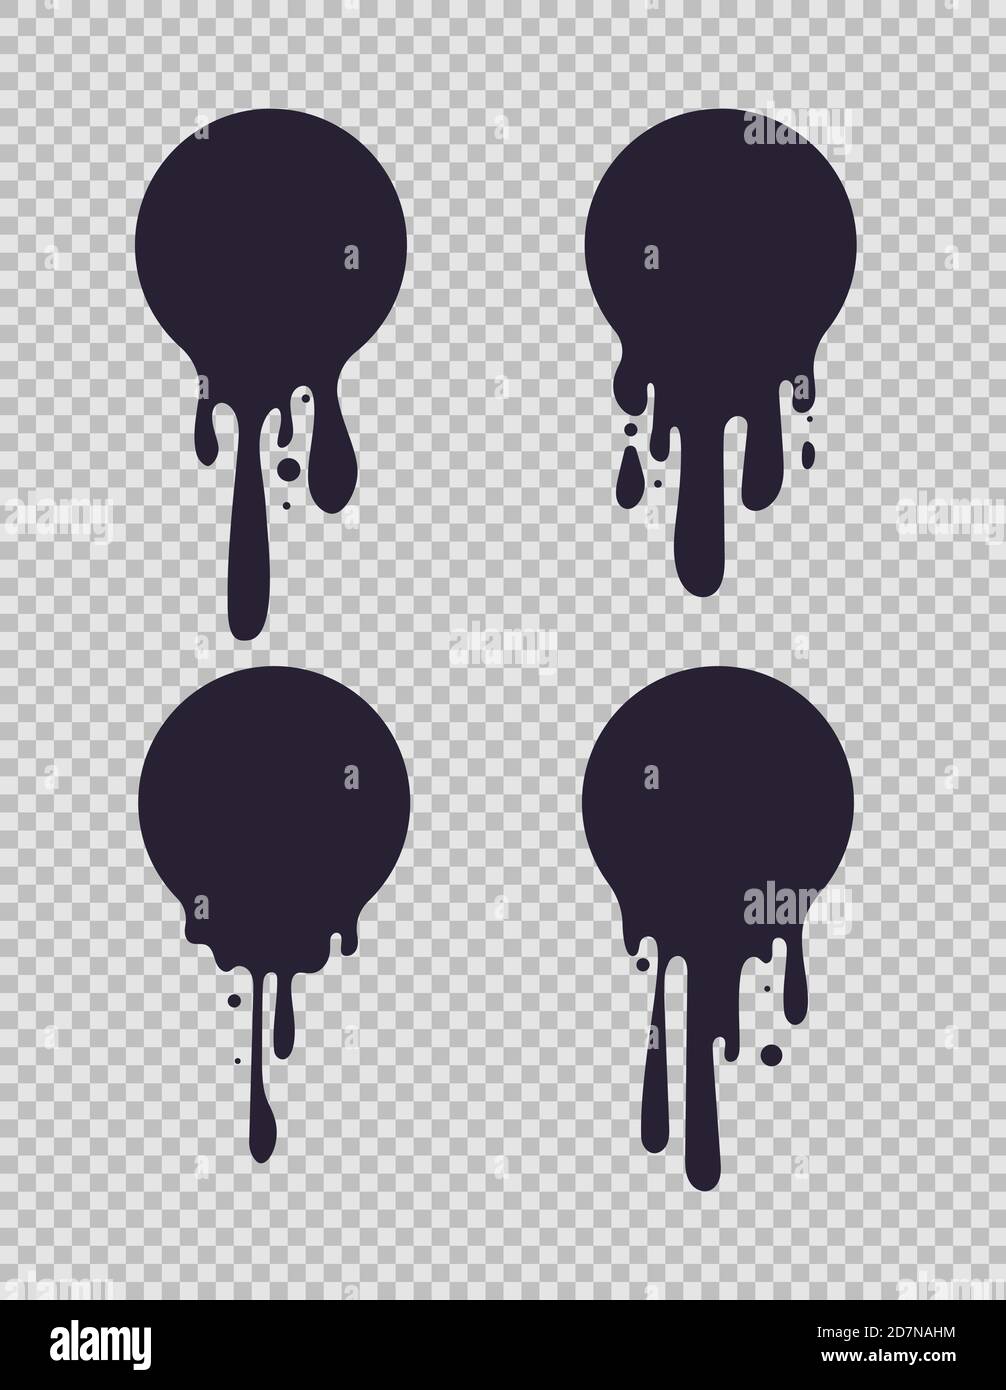 Dripping black circles. Inked round liquid shapes with paint drips for milk or chocolate logo vector set isolated on white background Stock Vector